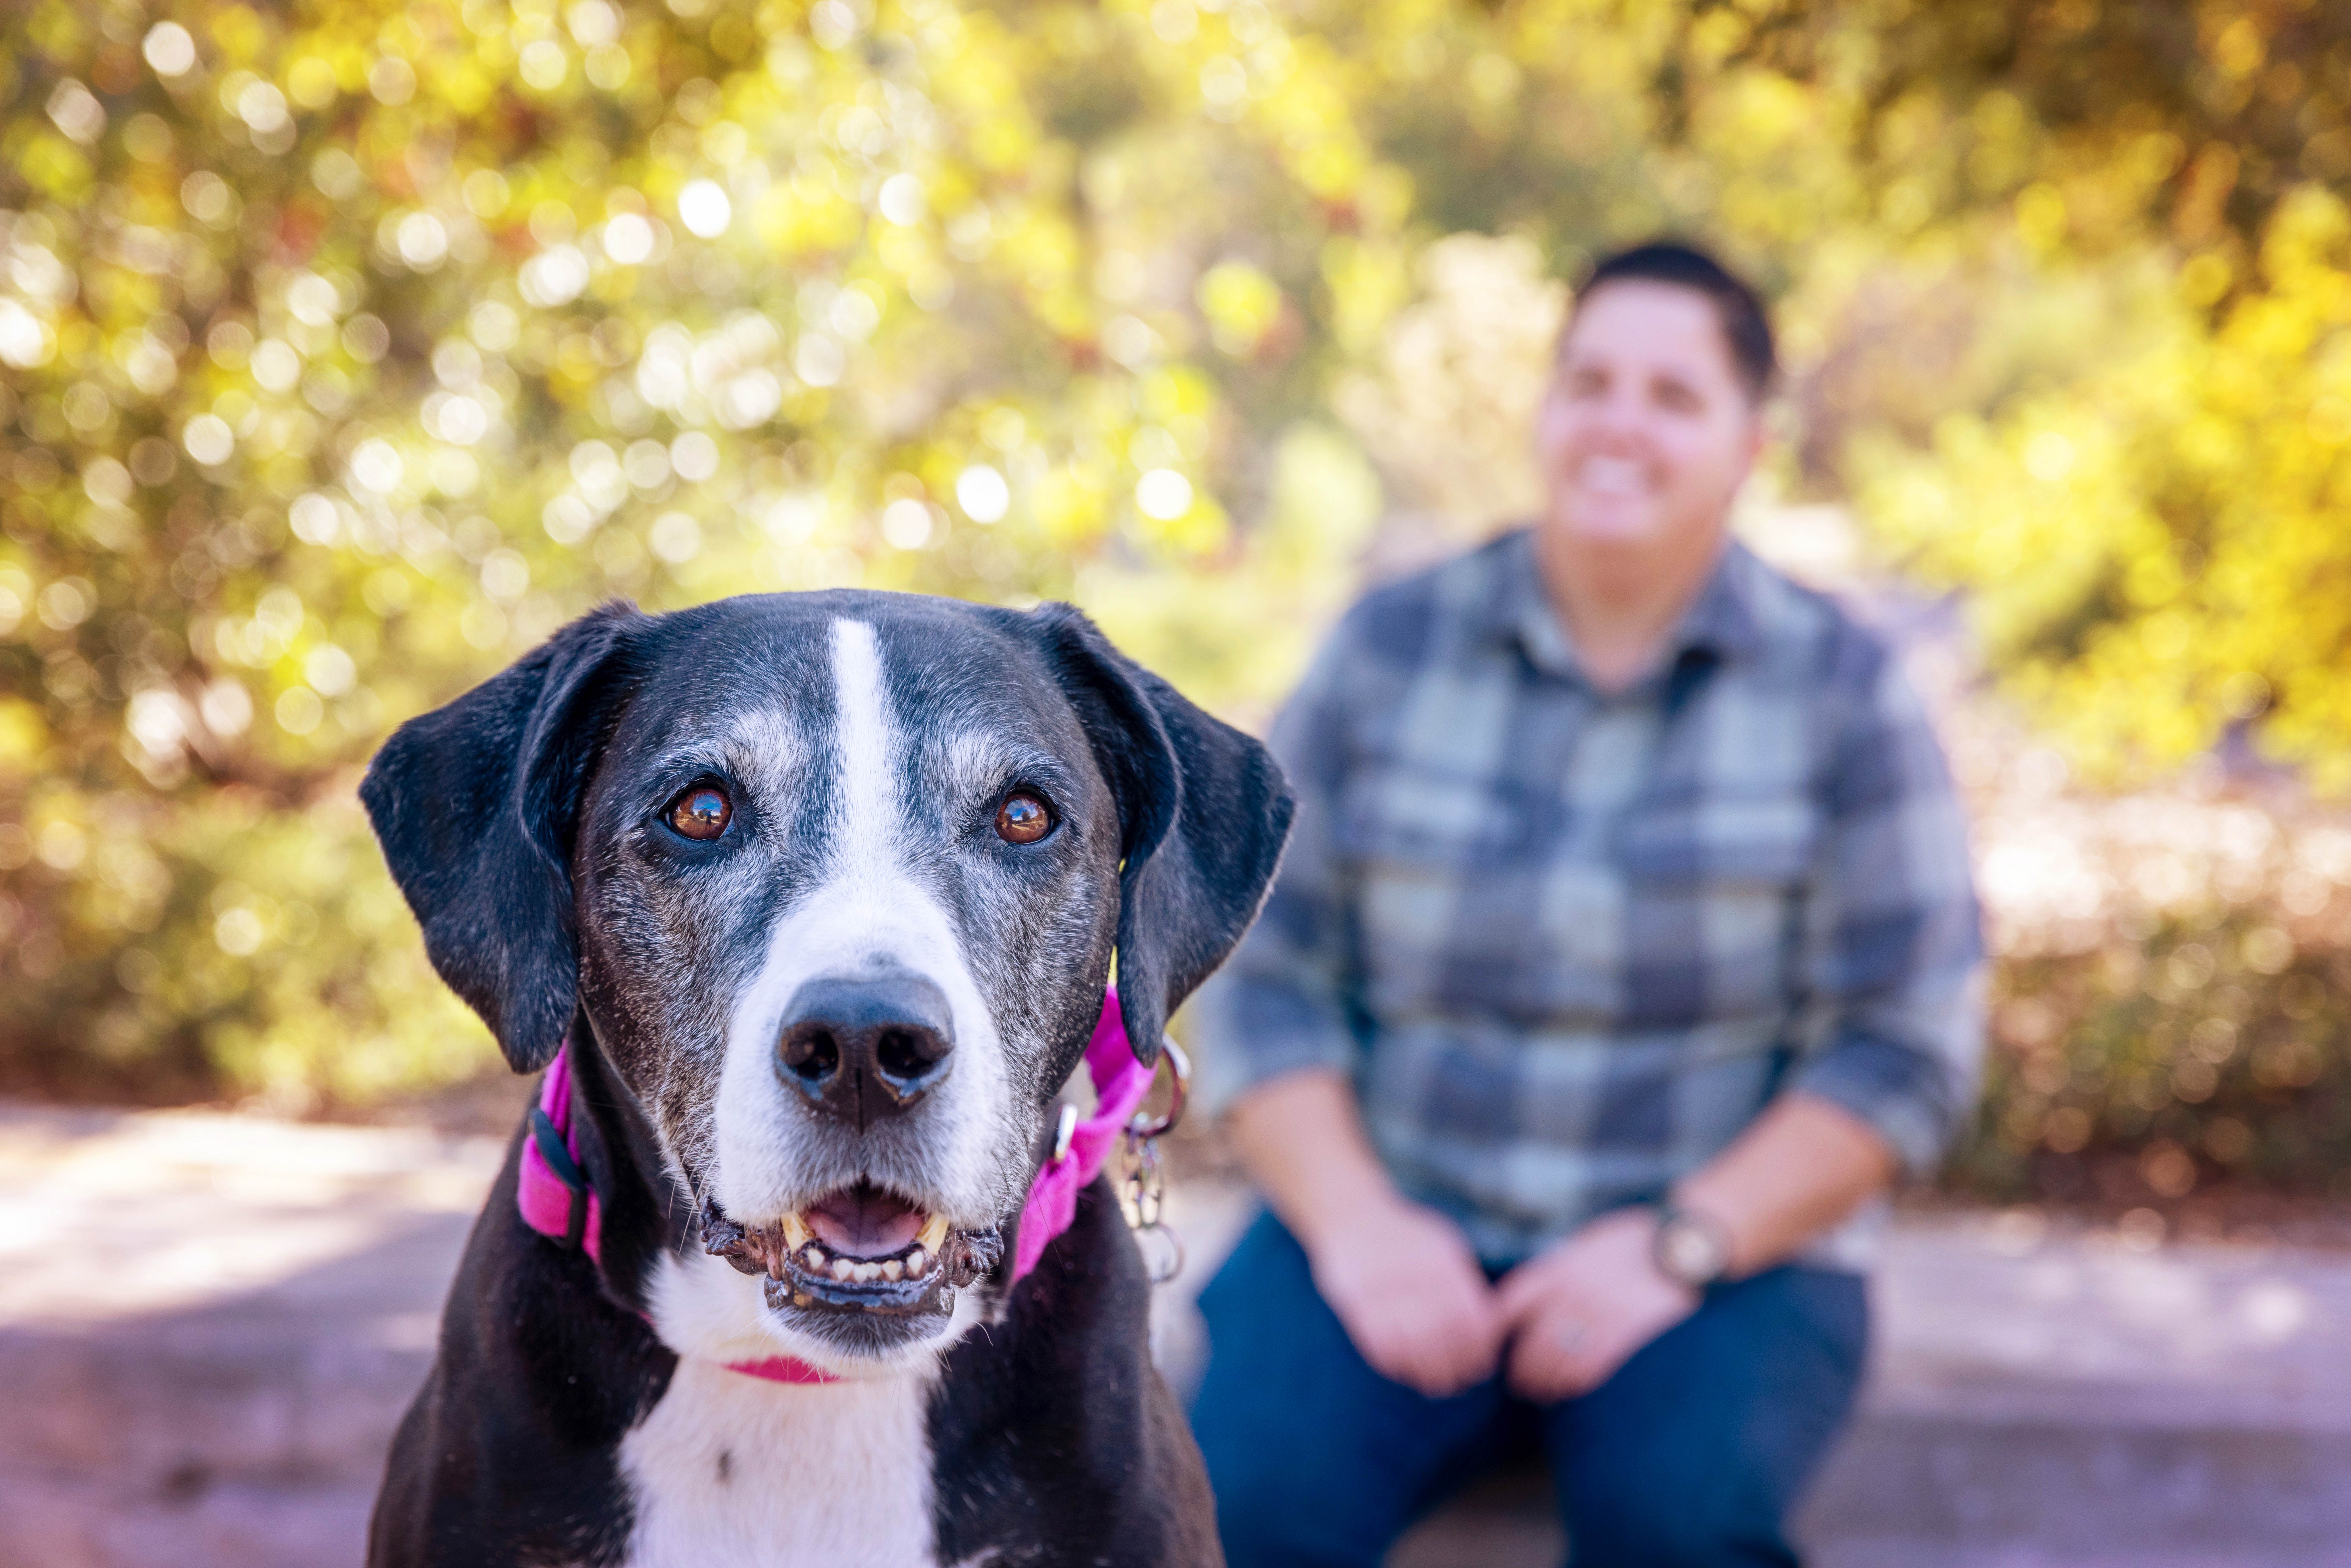 Senior dog in foreground with smiling person wearing a plaid shirt behind her